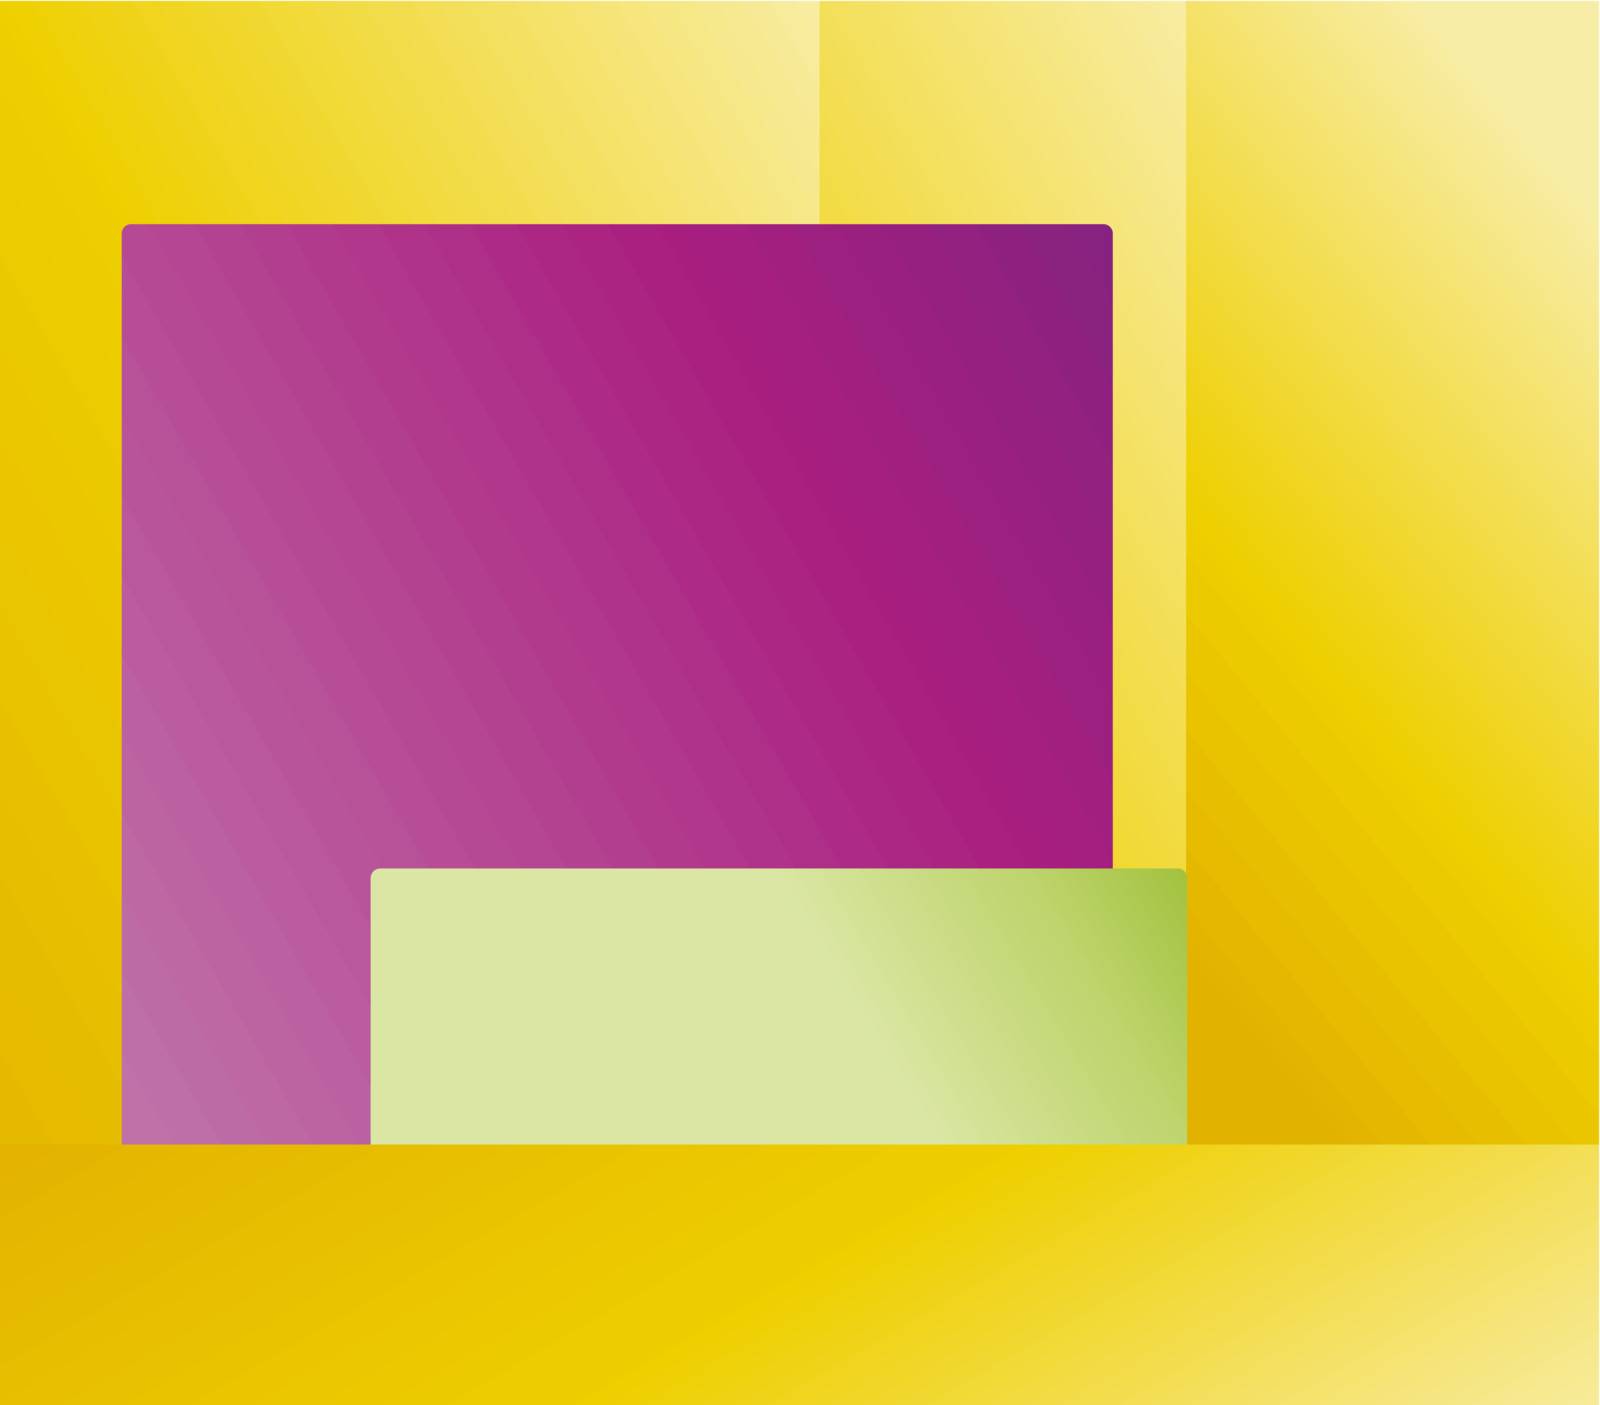 Abstract yellow, green and purple square background.